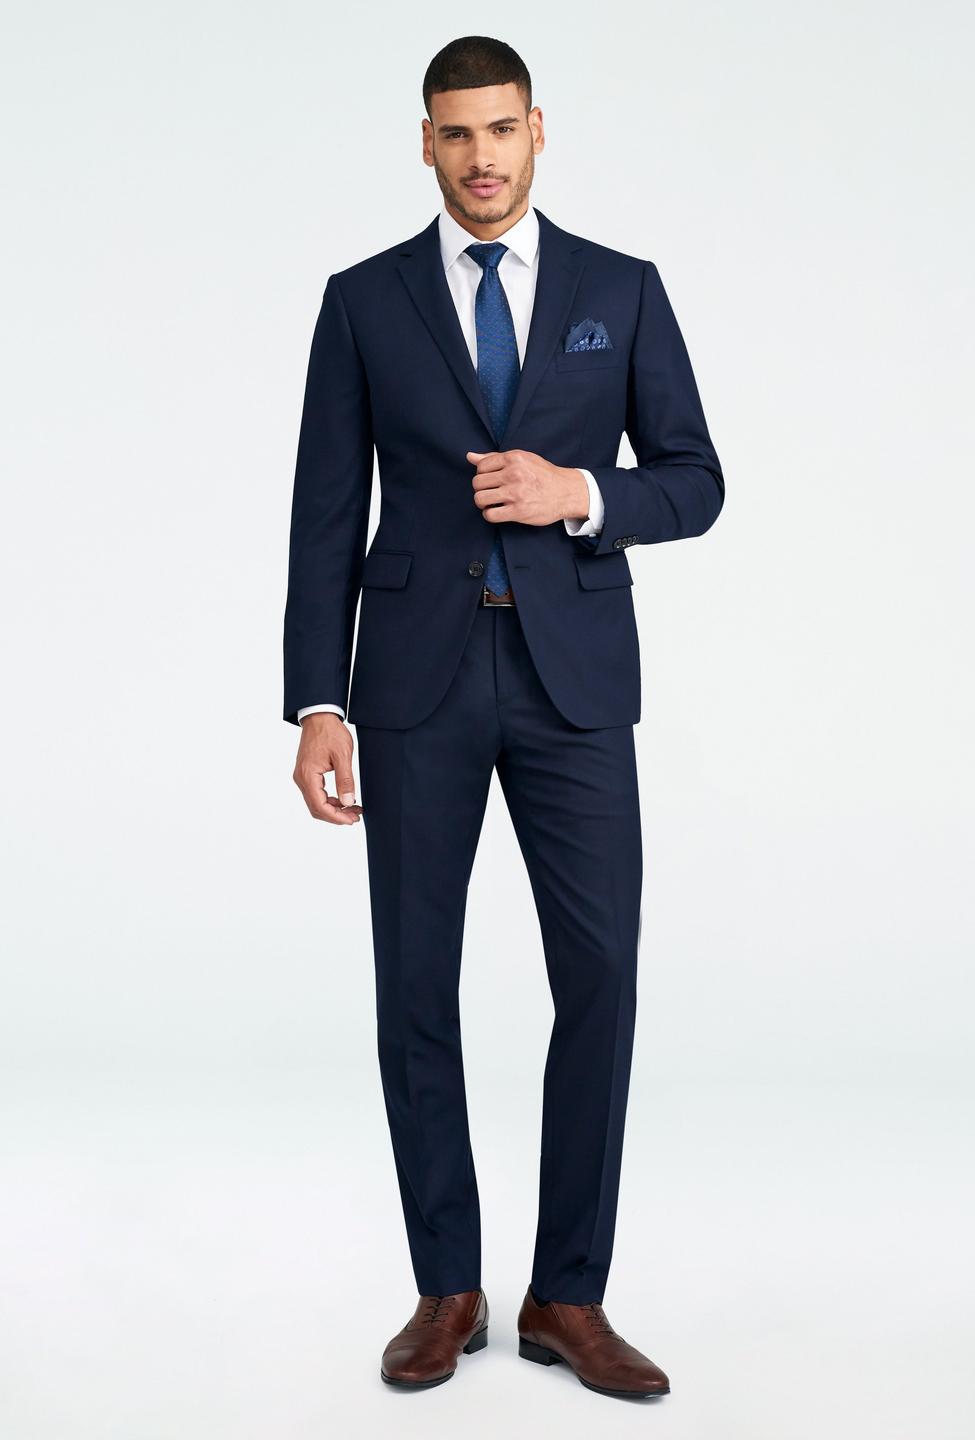 Navy suit - Hayward Solid Design from Luxury Indochino Collection